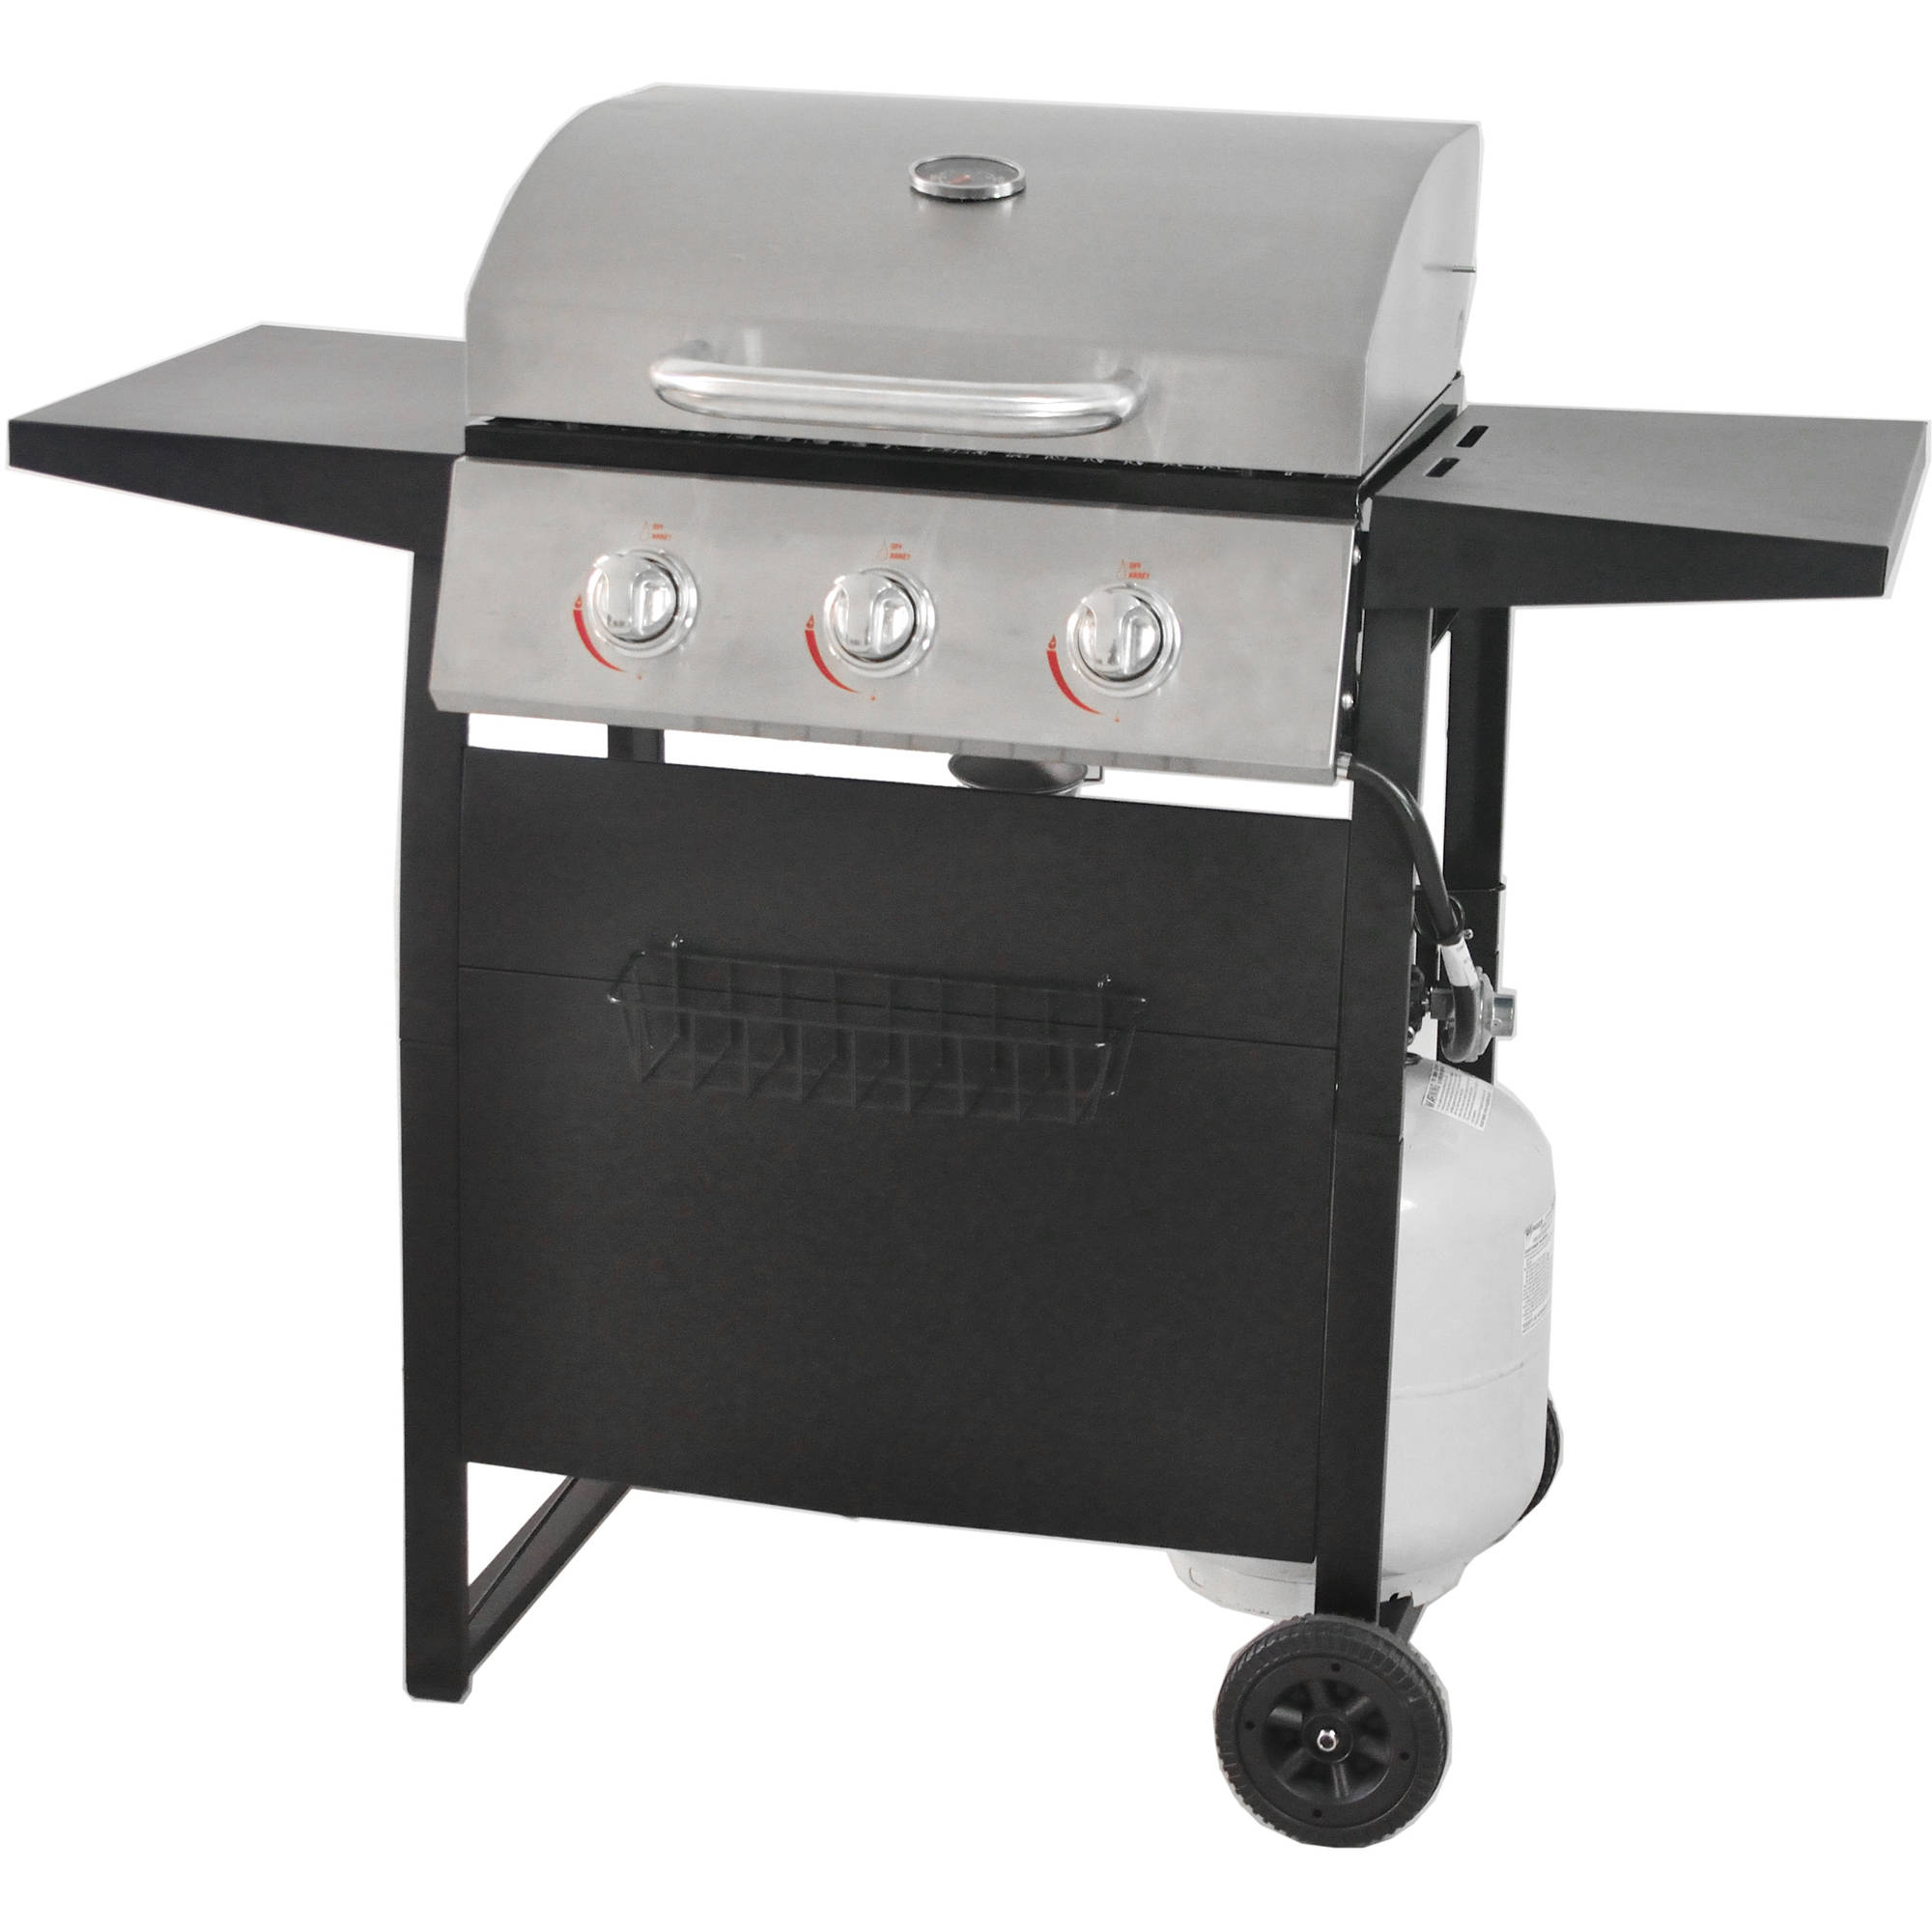 RevoAce 3-Burner Space Saver Propane Gas Grill, Stainless and Black, GBC1706W - image 1 of 11